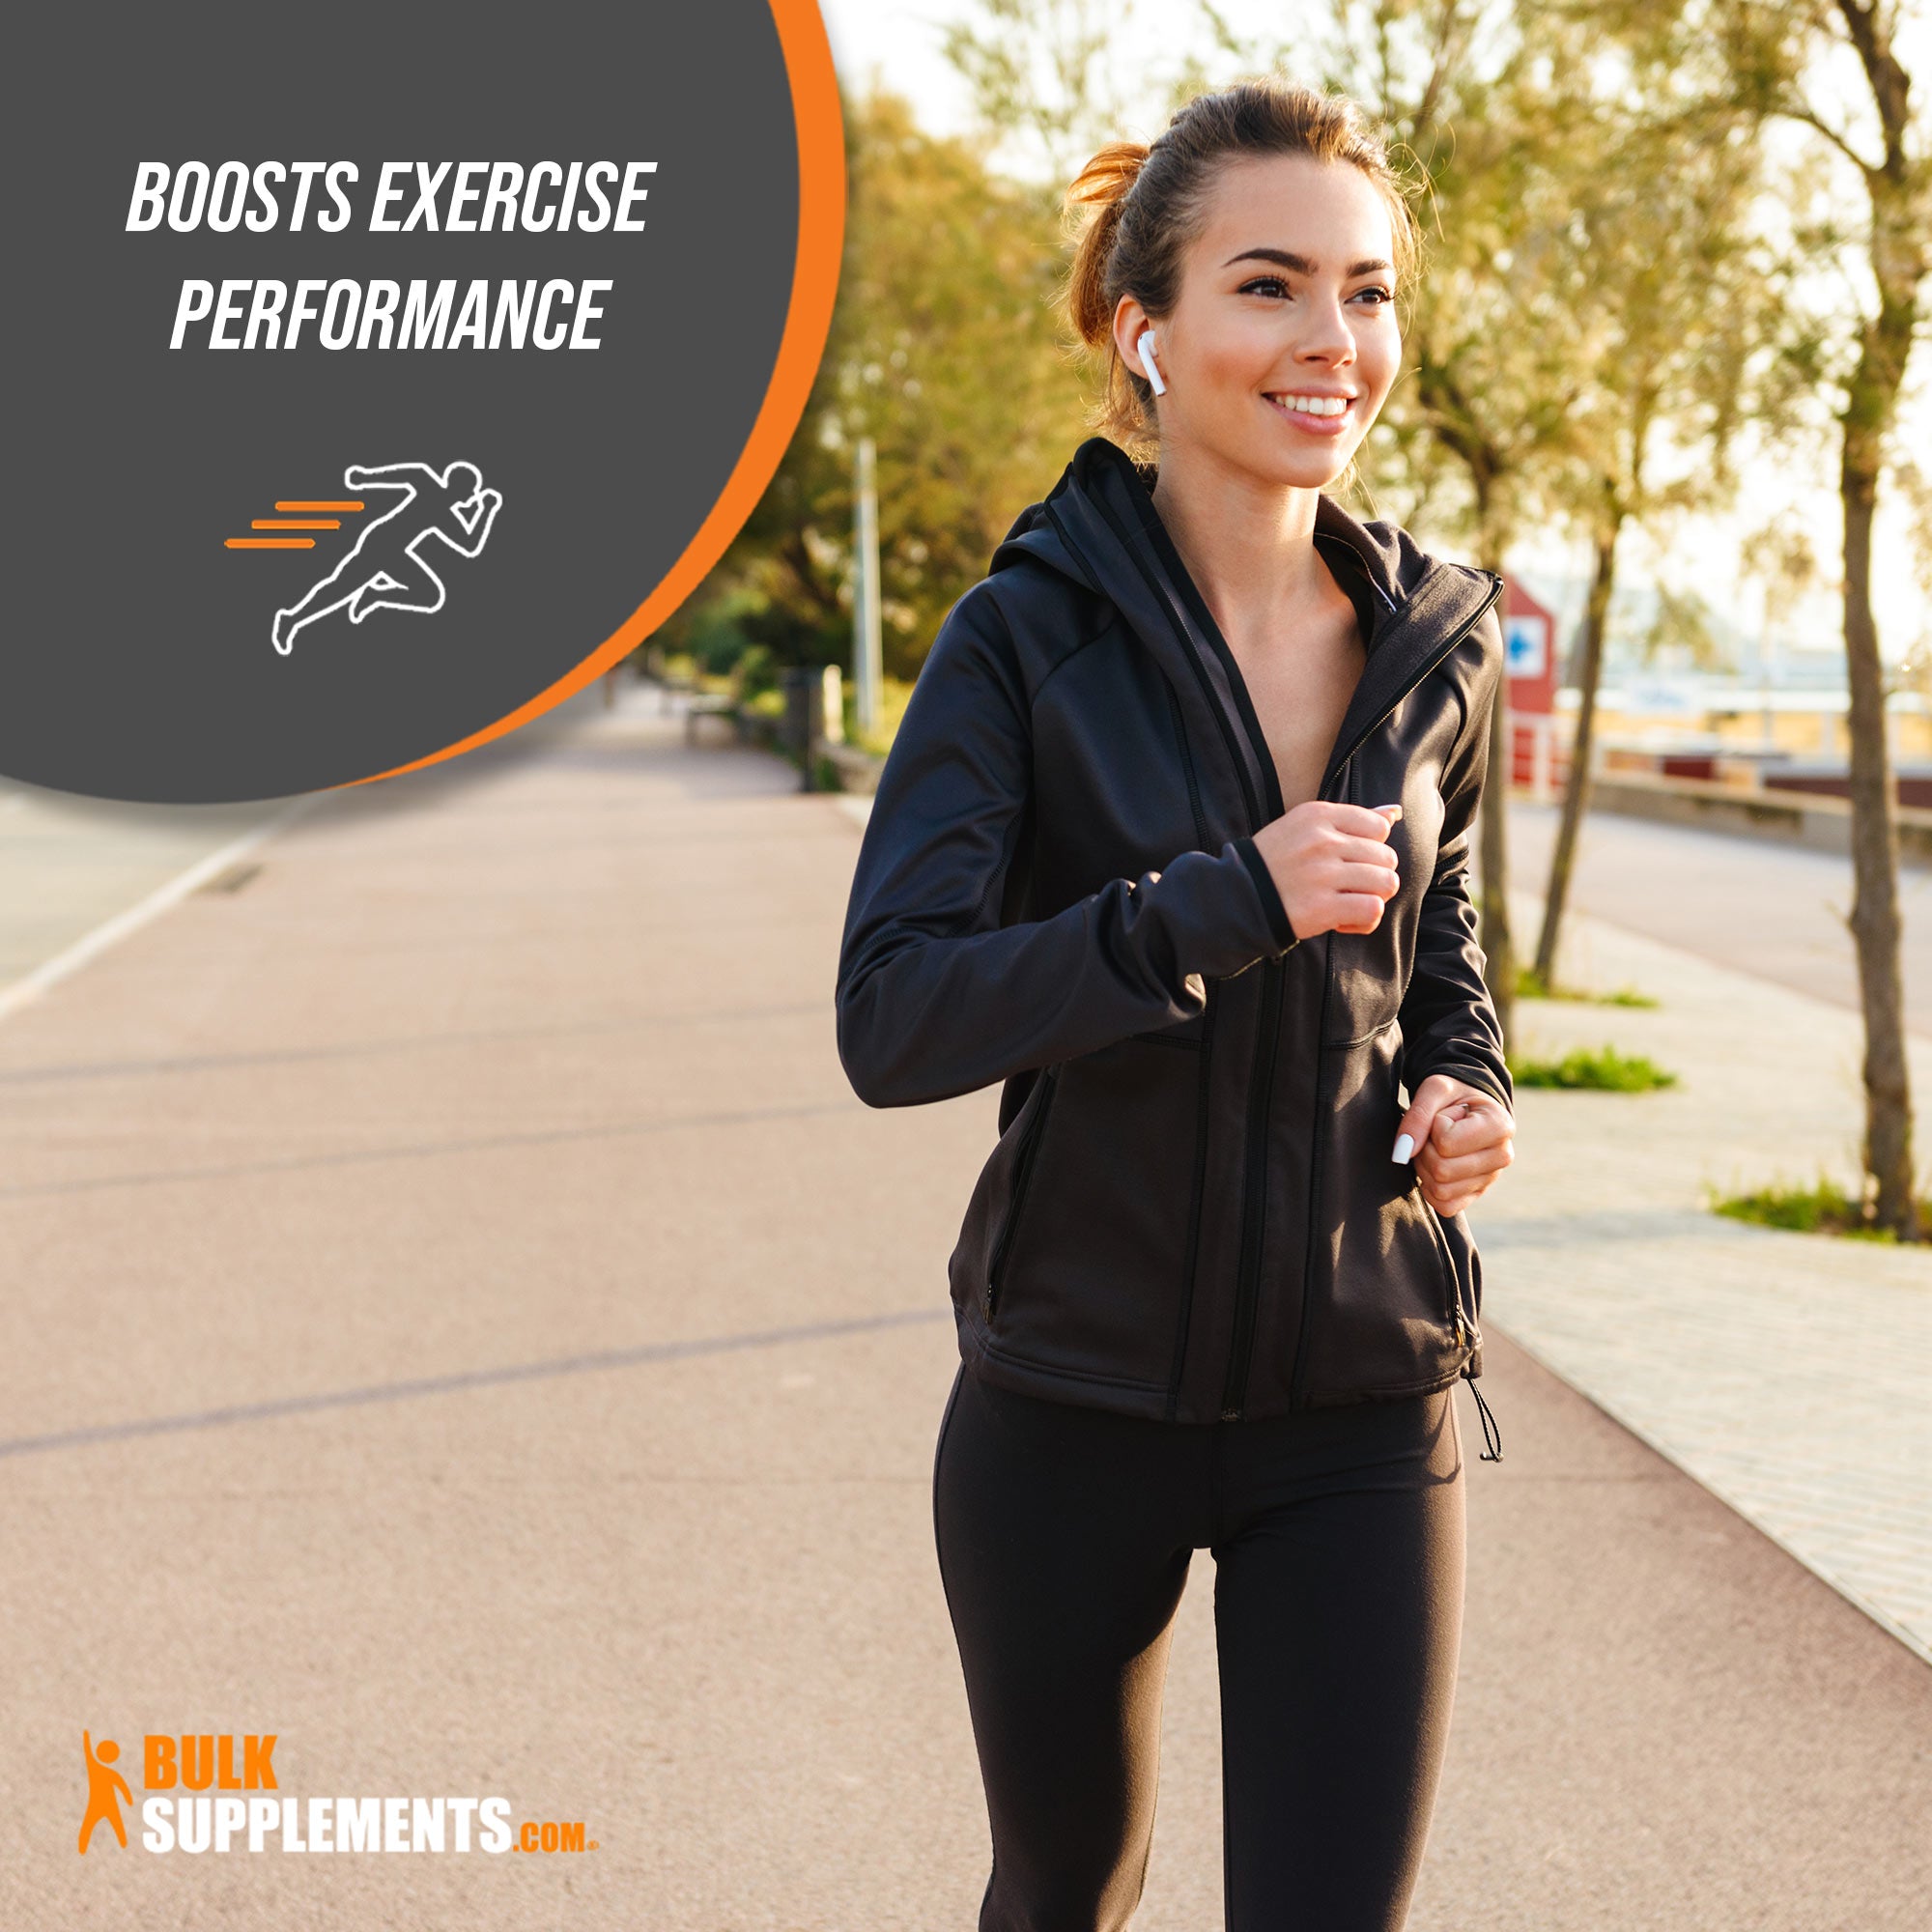 Ferrous Fumarate Exercise Performance Boost Workout Supplements